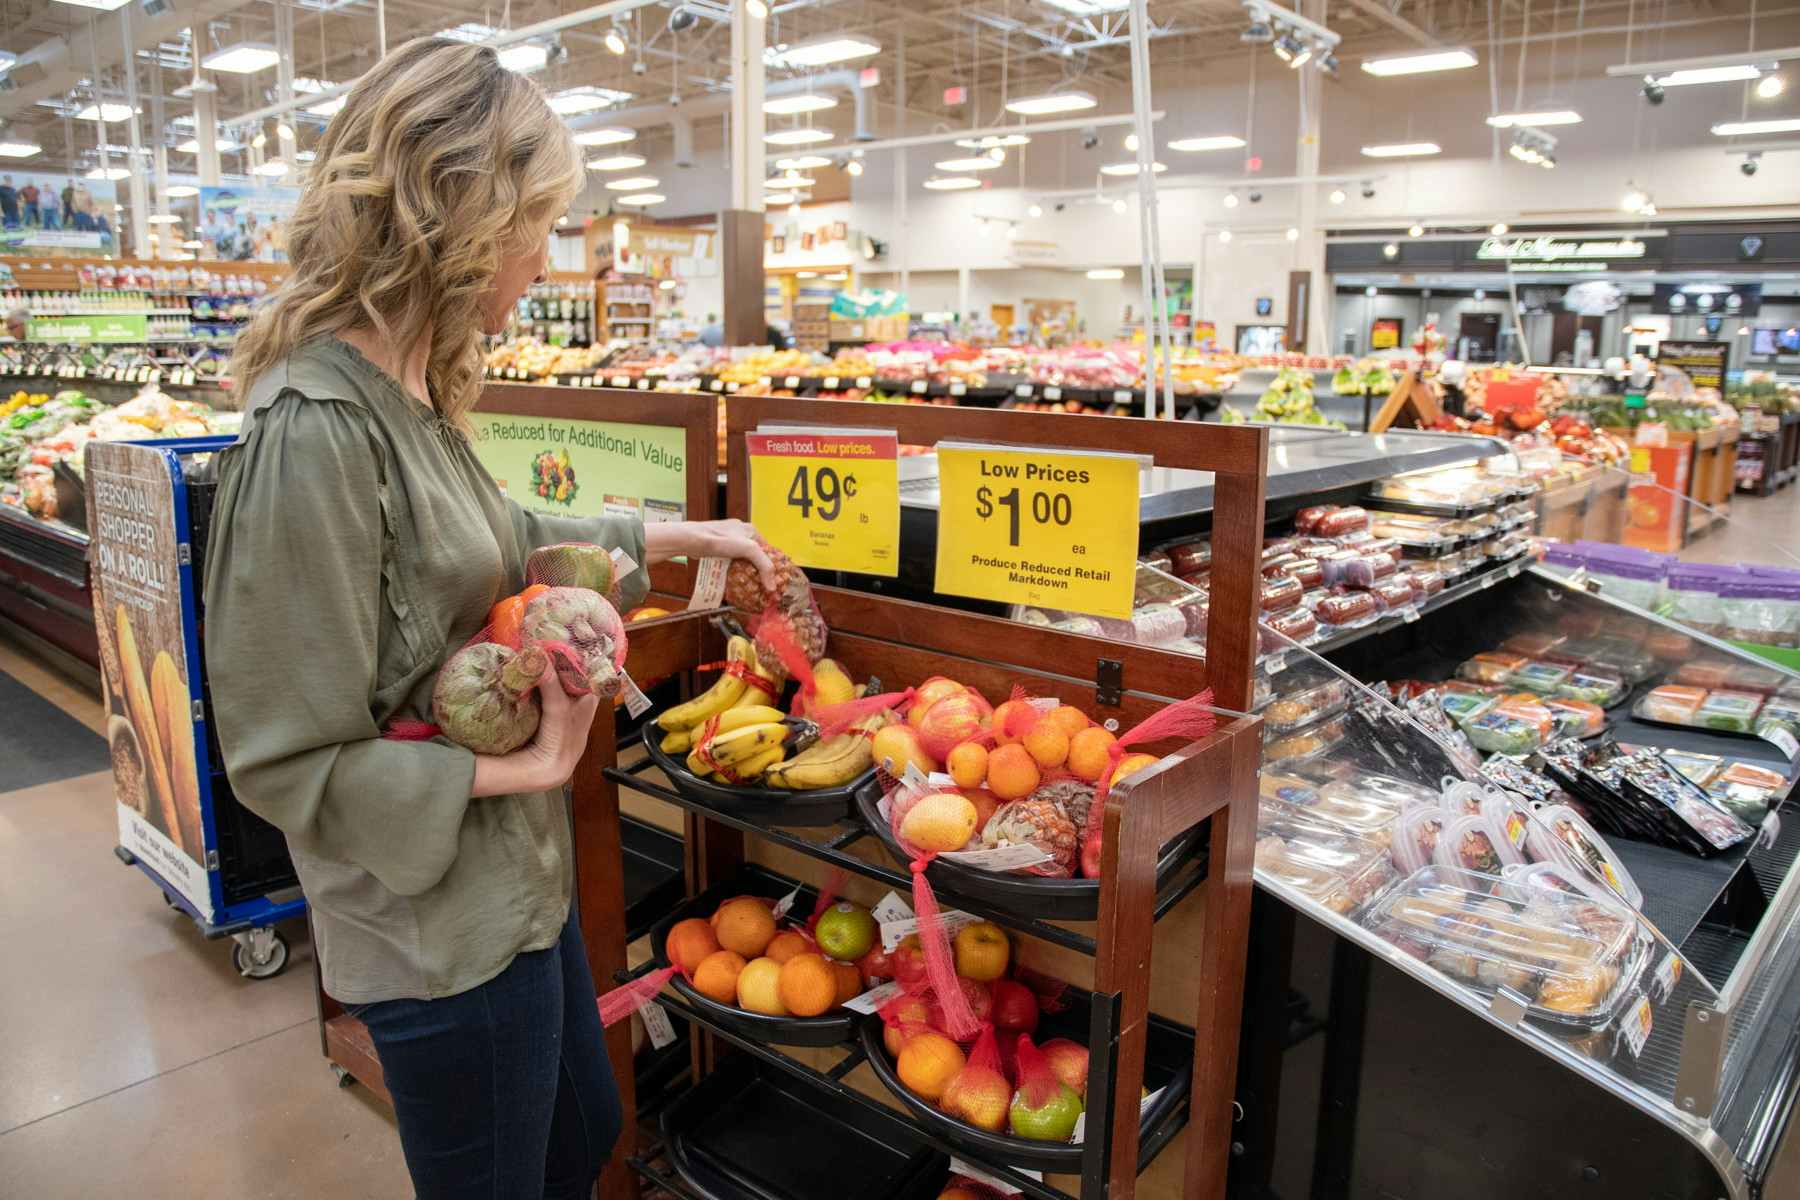 Save at least 25% with markdown produce at Kroger.